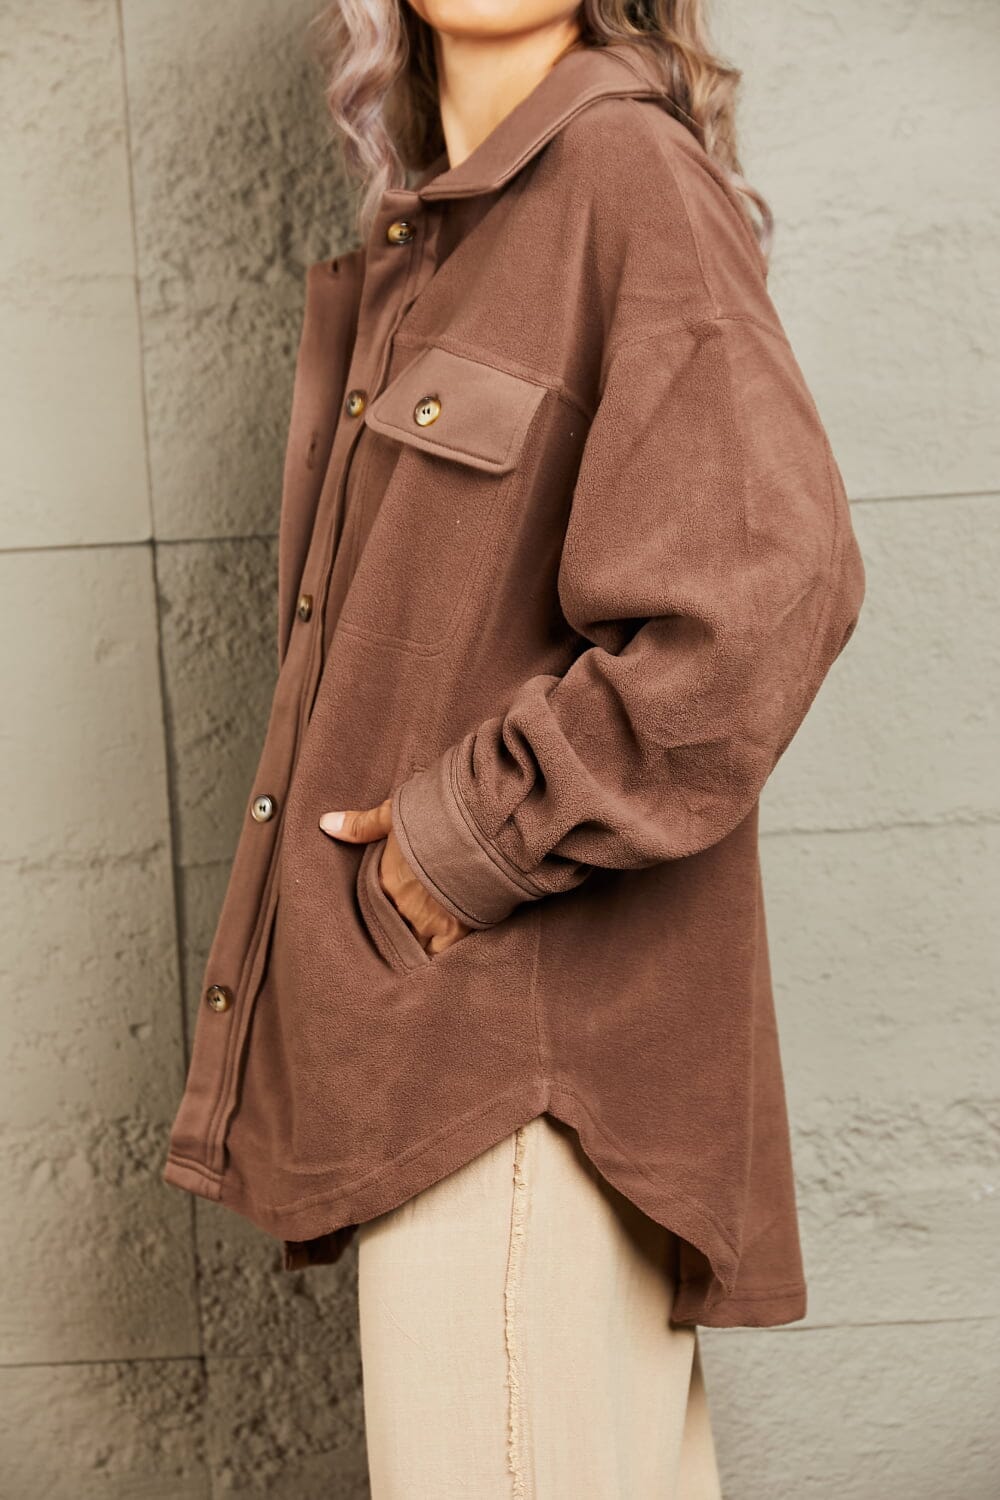 Heimish Coffee Brown Collared Neck Long Sleeves Button Down Shacket Coats & Jackets jehouze 